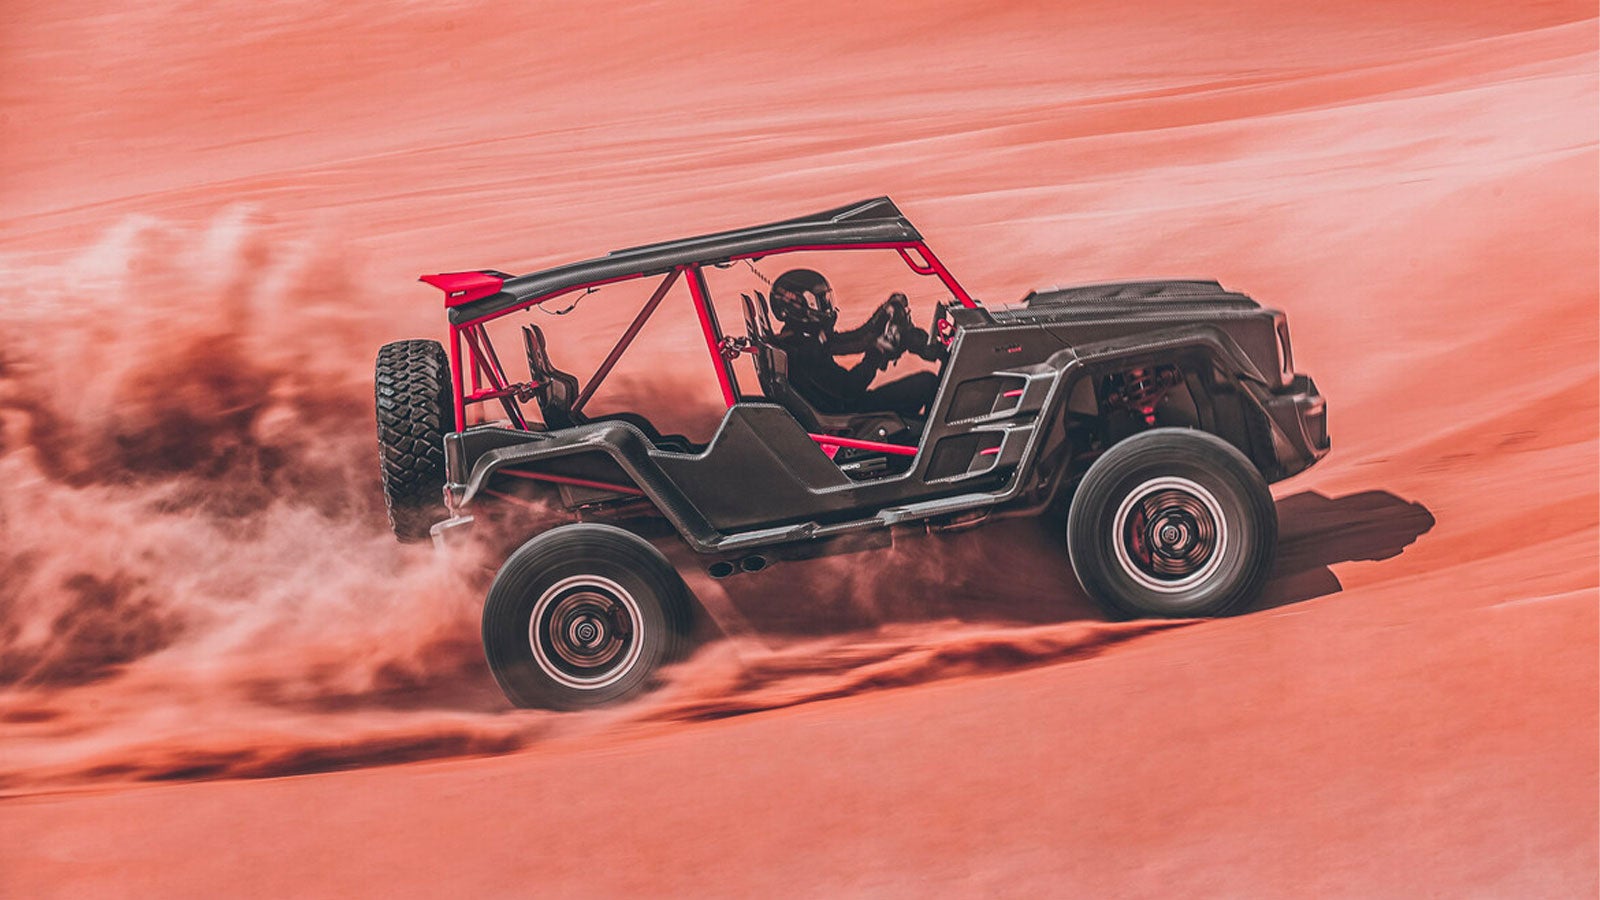 Brabus’s 900-HP Dune Buggy Can Be Yours for Roughly $1 Million